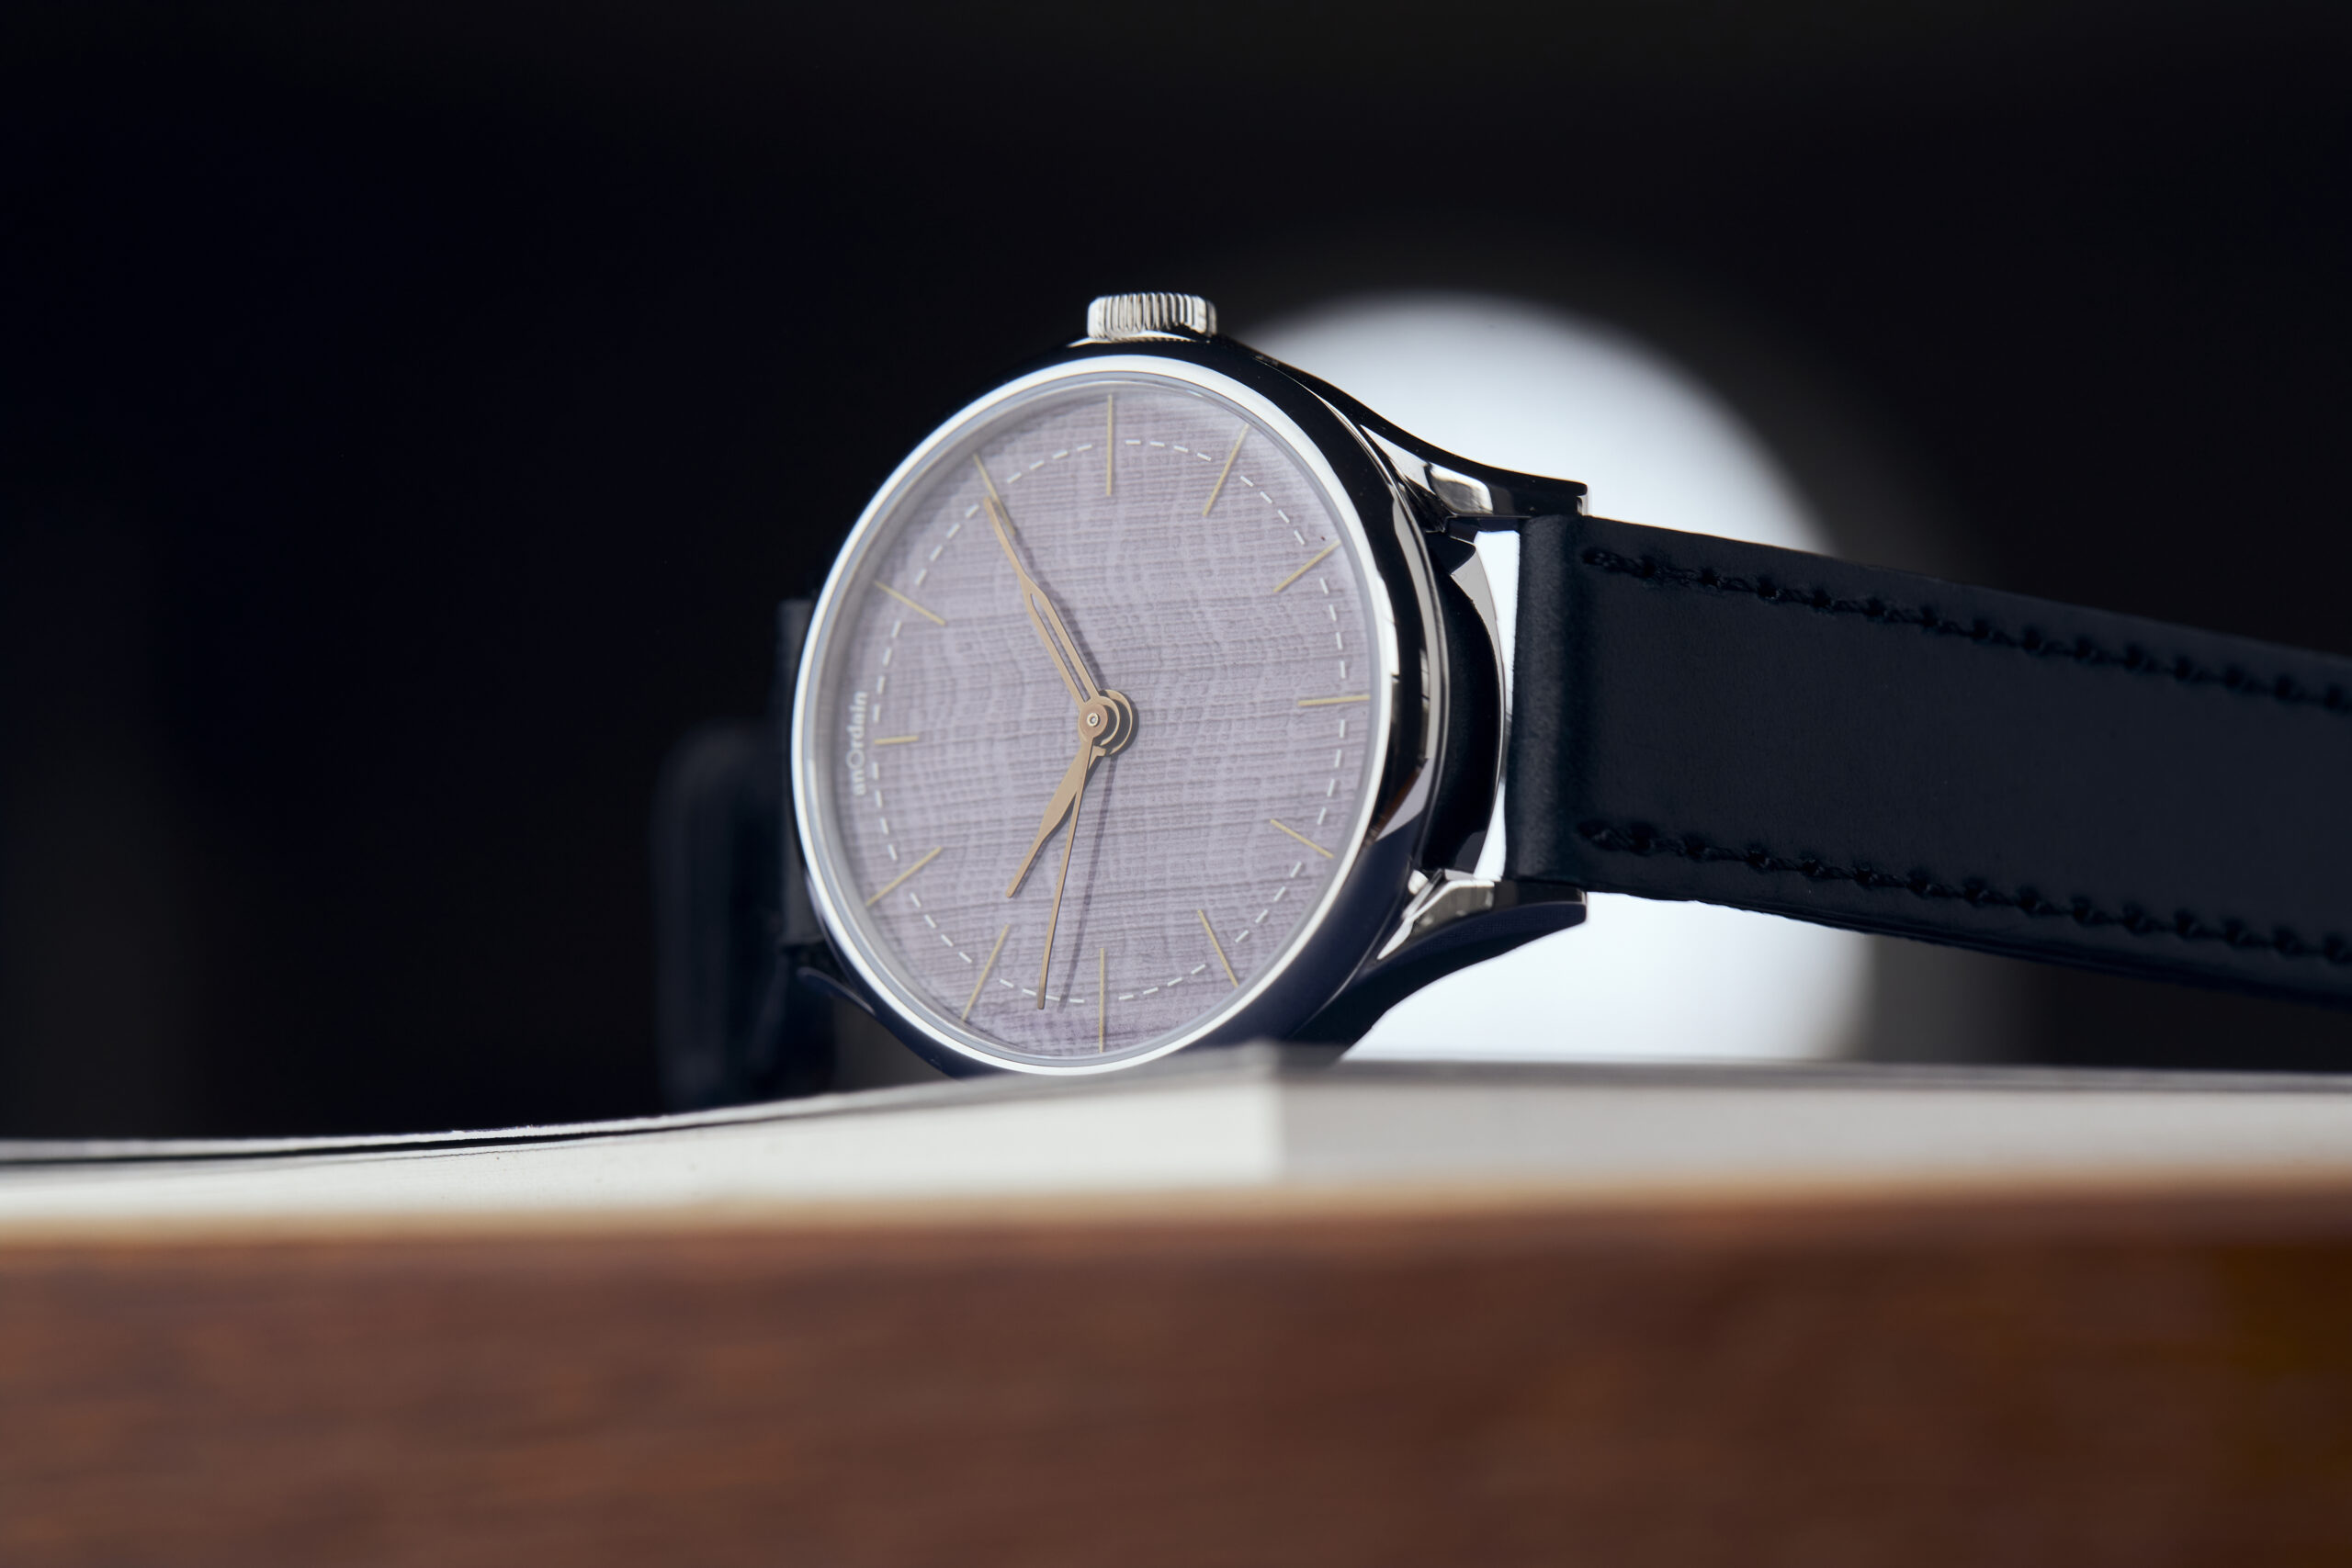 AnOrdain-for-EveryWatch-Image-by-Alex-Robson-for-Lyon-Turnbull-2de4ce8i8-scaled